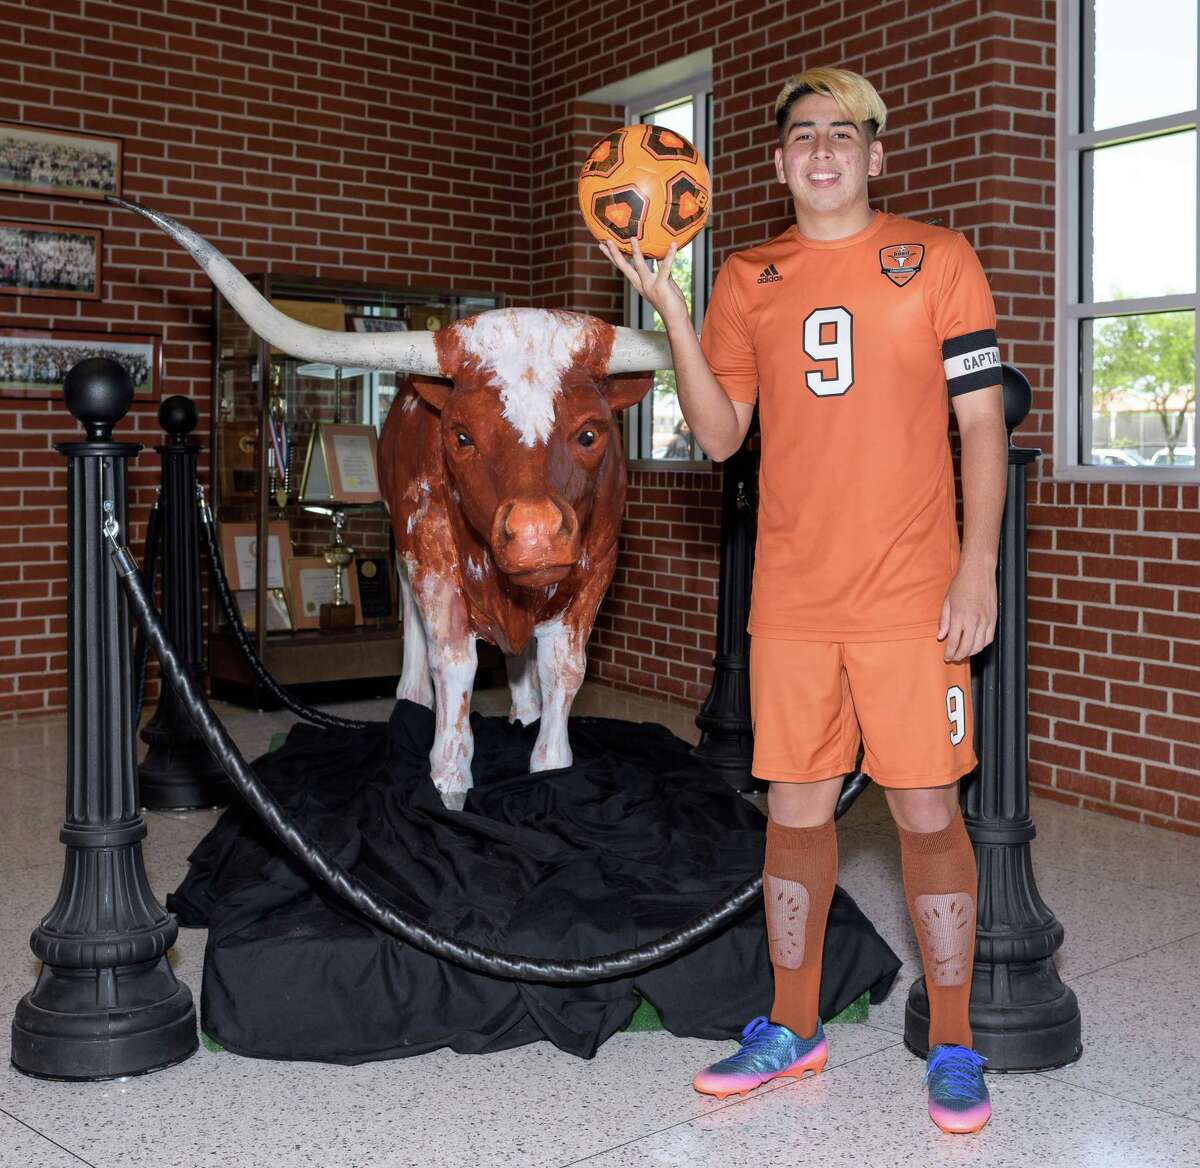 Sabino Lopez of the Dobie Longhorns is the Houston Chronicle's All-Greater Houston Boys Soccer Player of the Year and poses for a photo at Dobie High School in Houston Texas on Thursday, May 4, 2017.